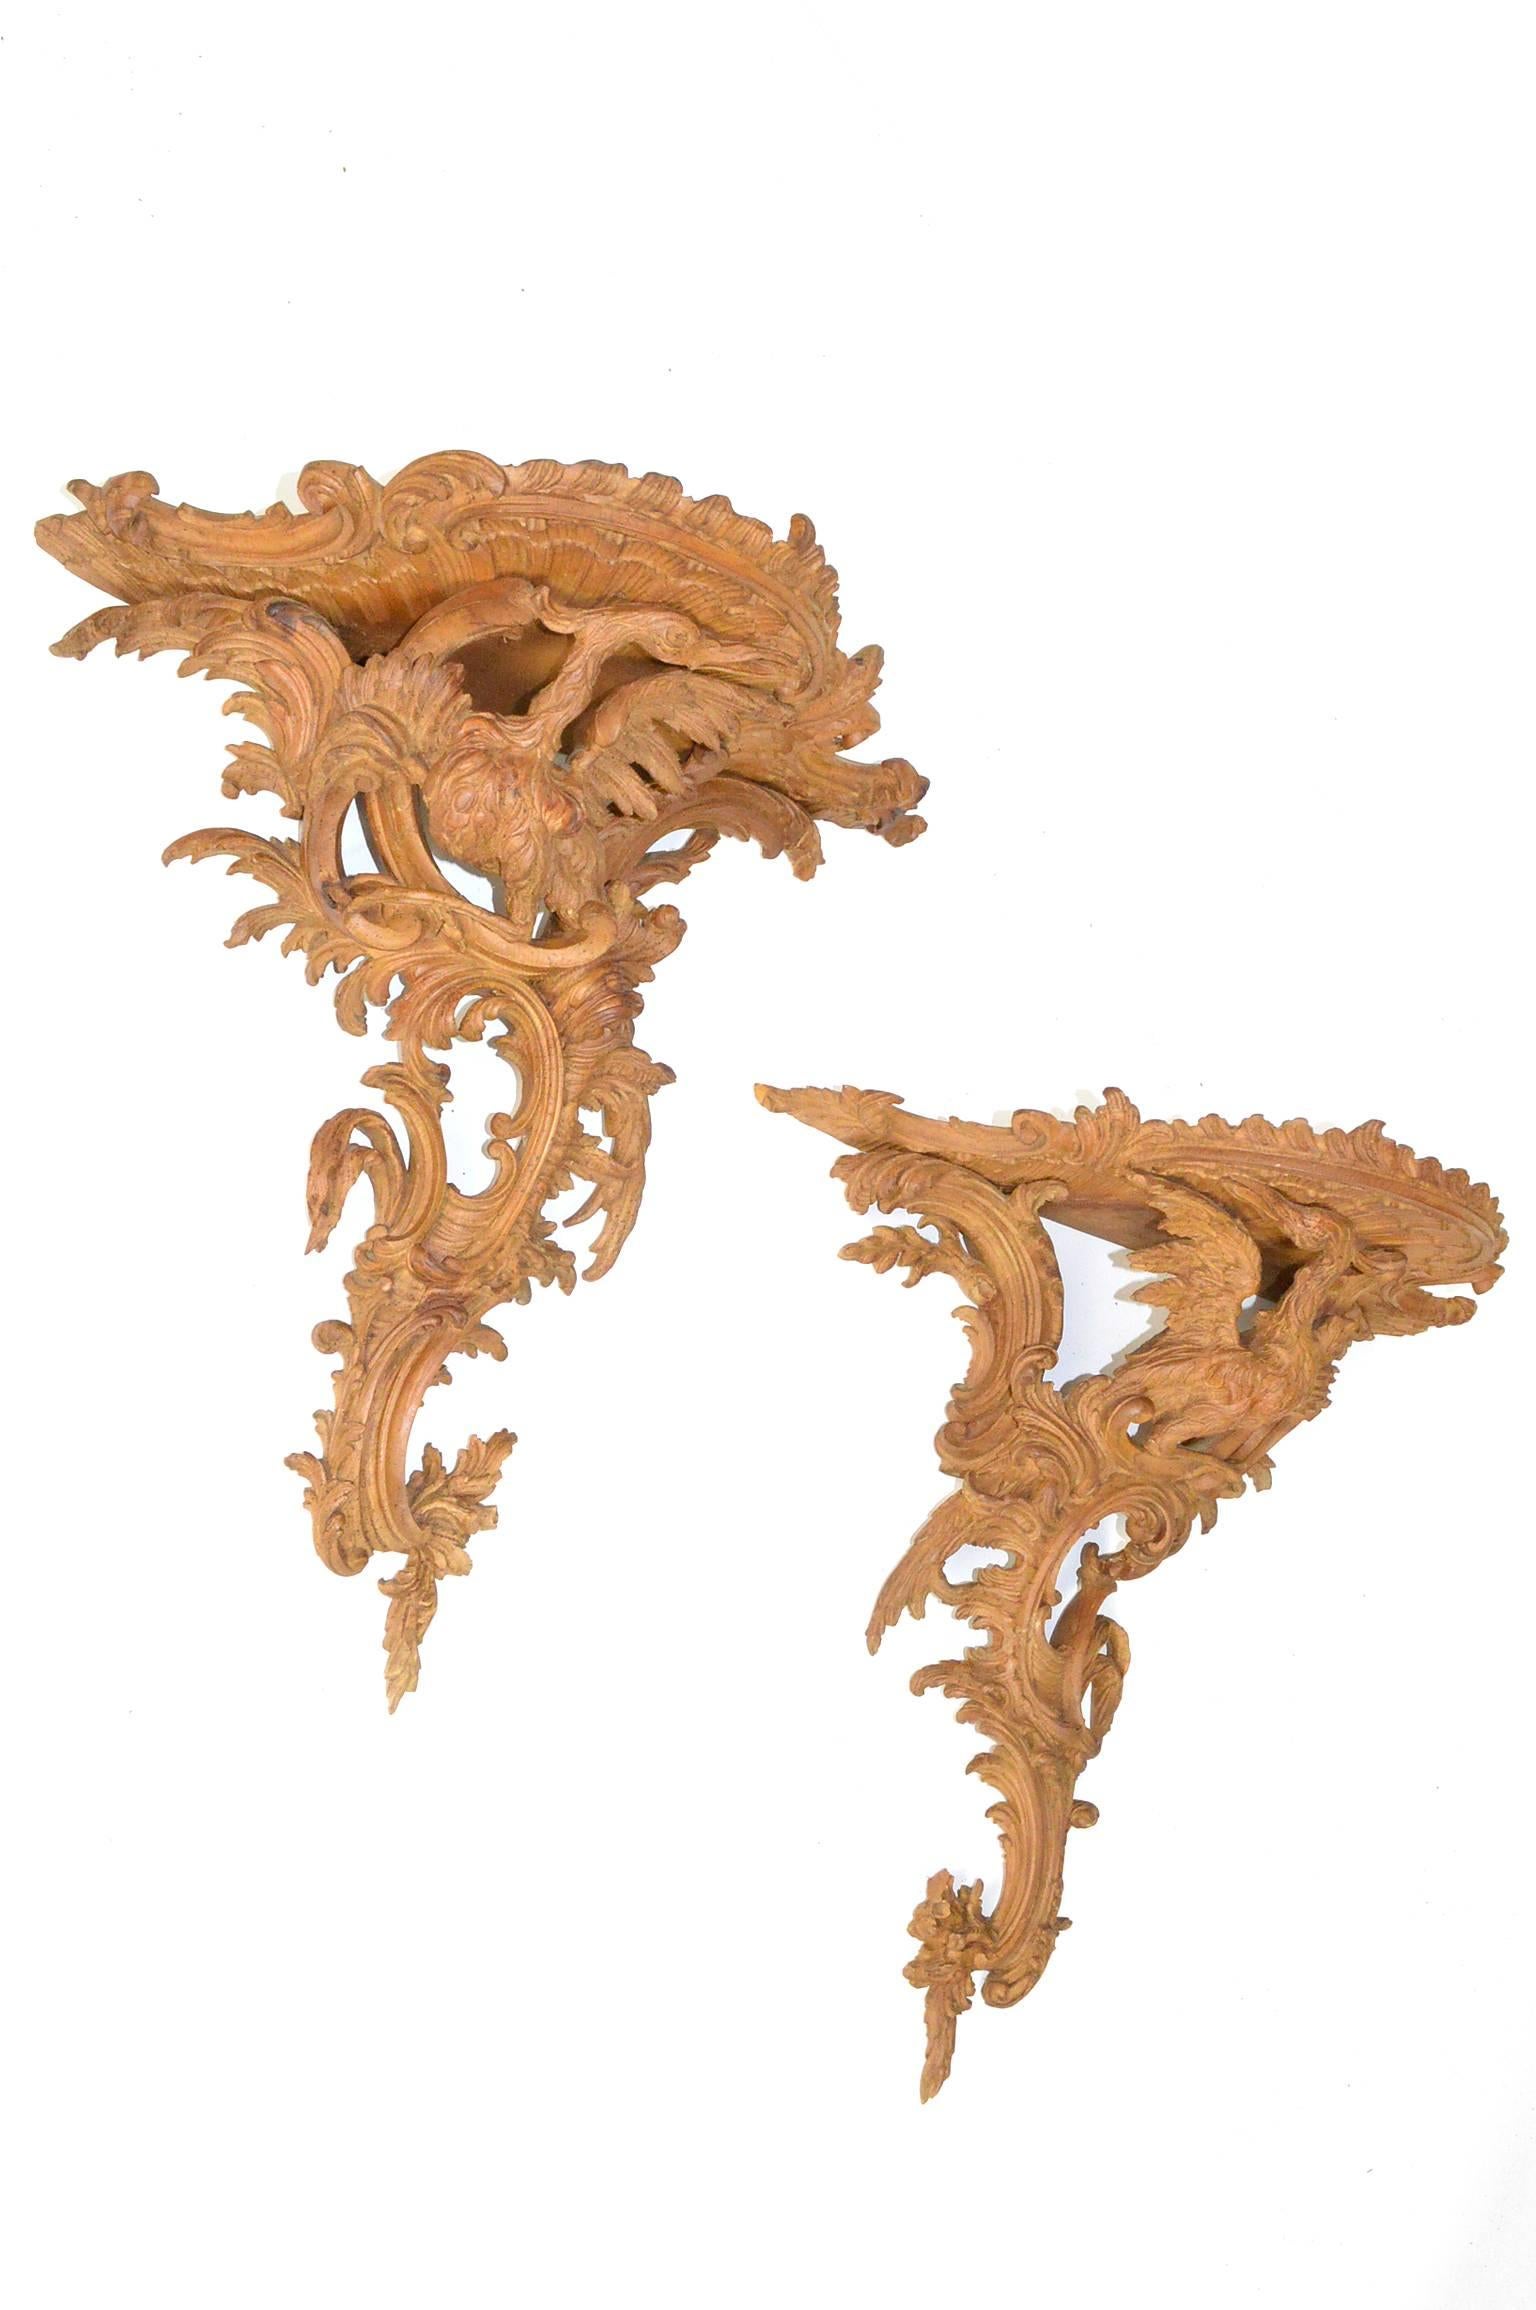 Pair of carved wood wall brackets with winged eagles in opposing stances. Finely carved, likely Italian, early 20th century.
Purchased in Italy, circa 1955.